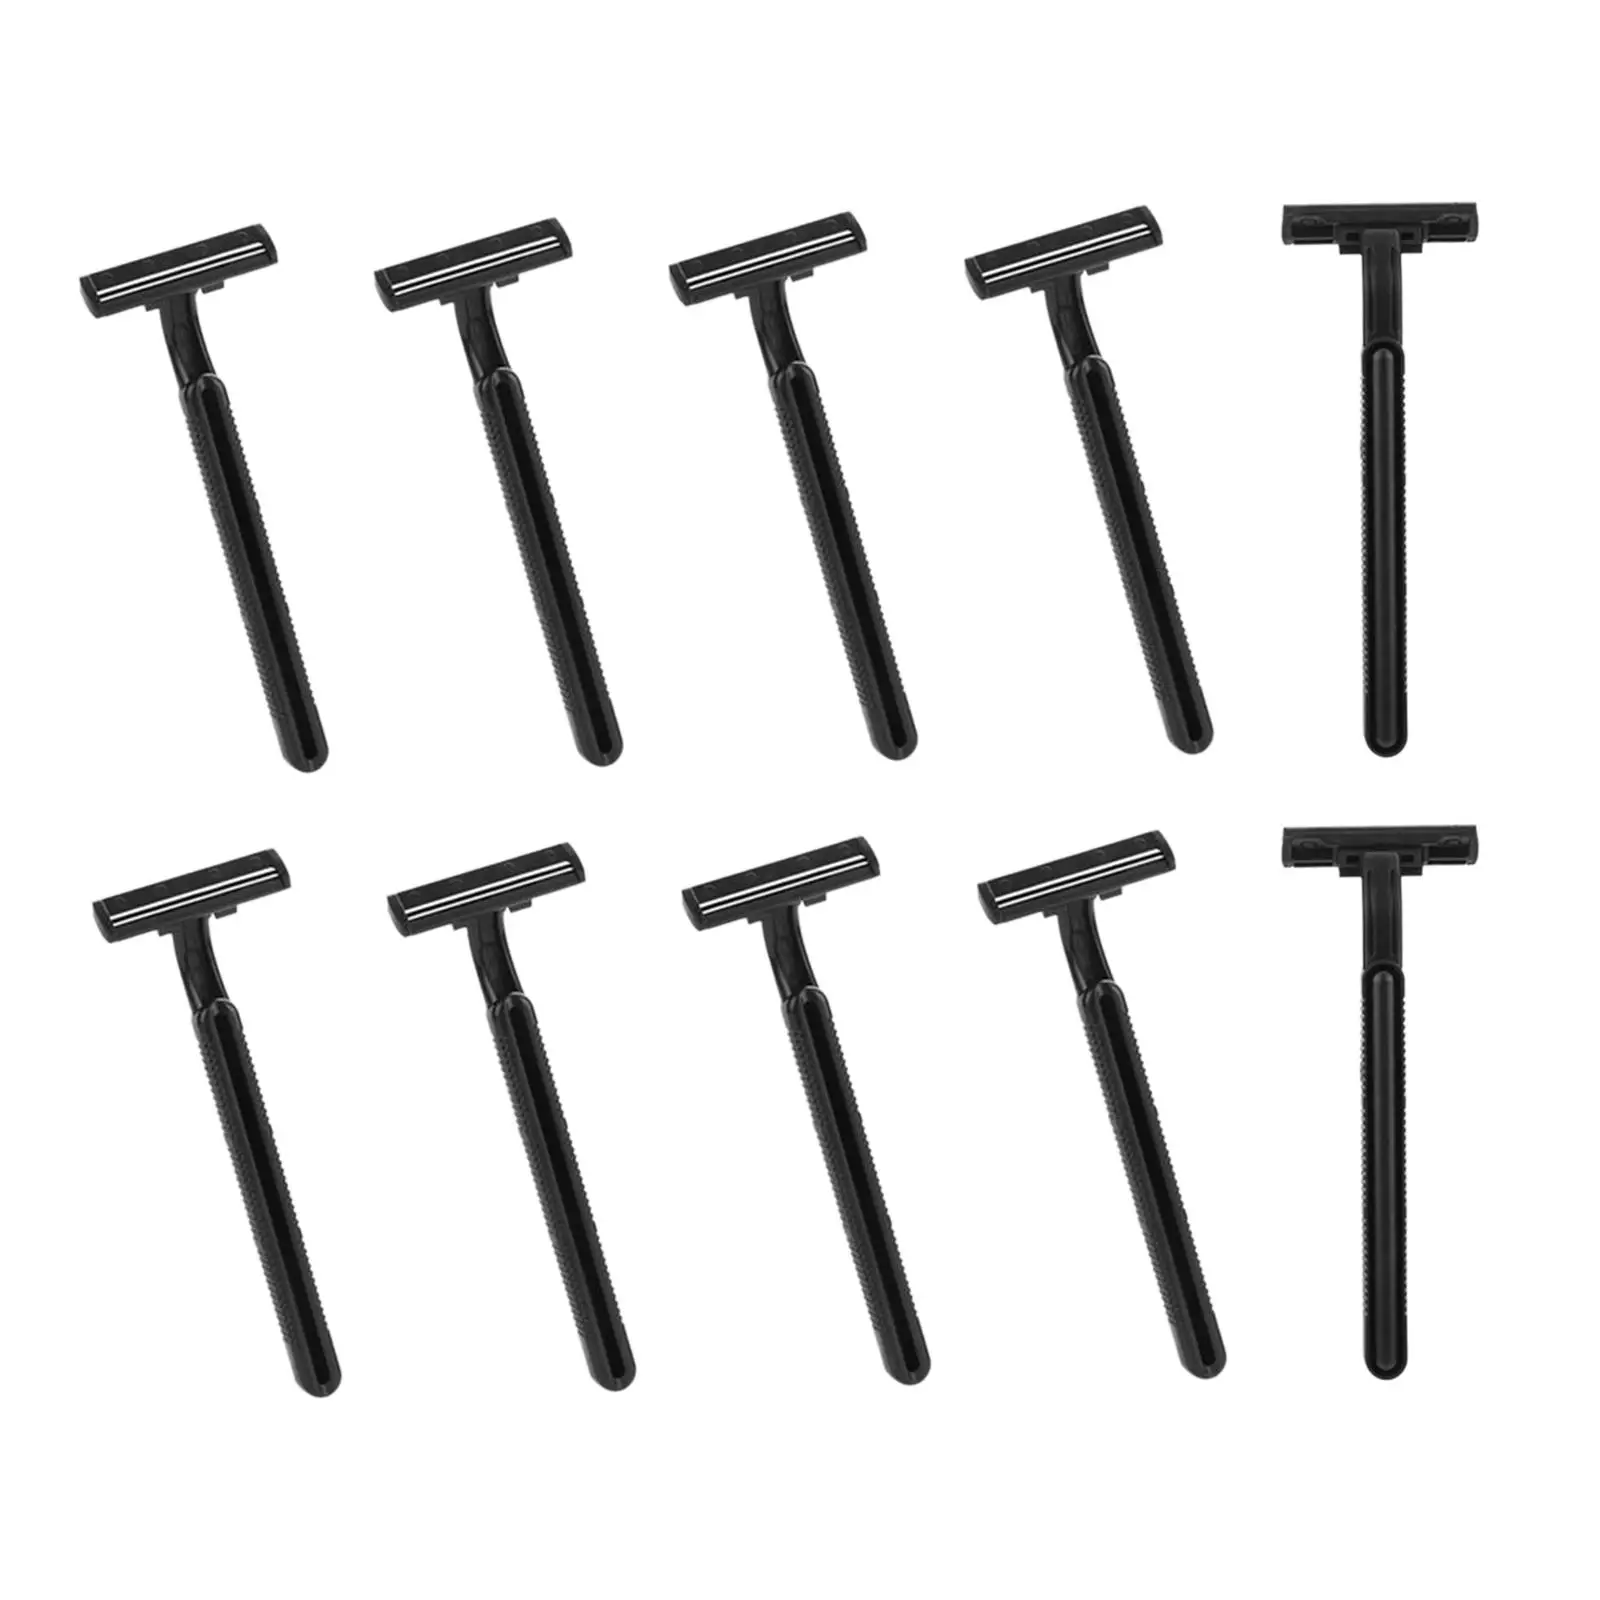 10Pcs Disposable Shaver Long Non Slip Handle Grooming Tool Shaver Face Hair Removal for Men Barber Shop Use Travel